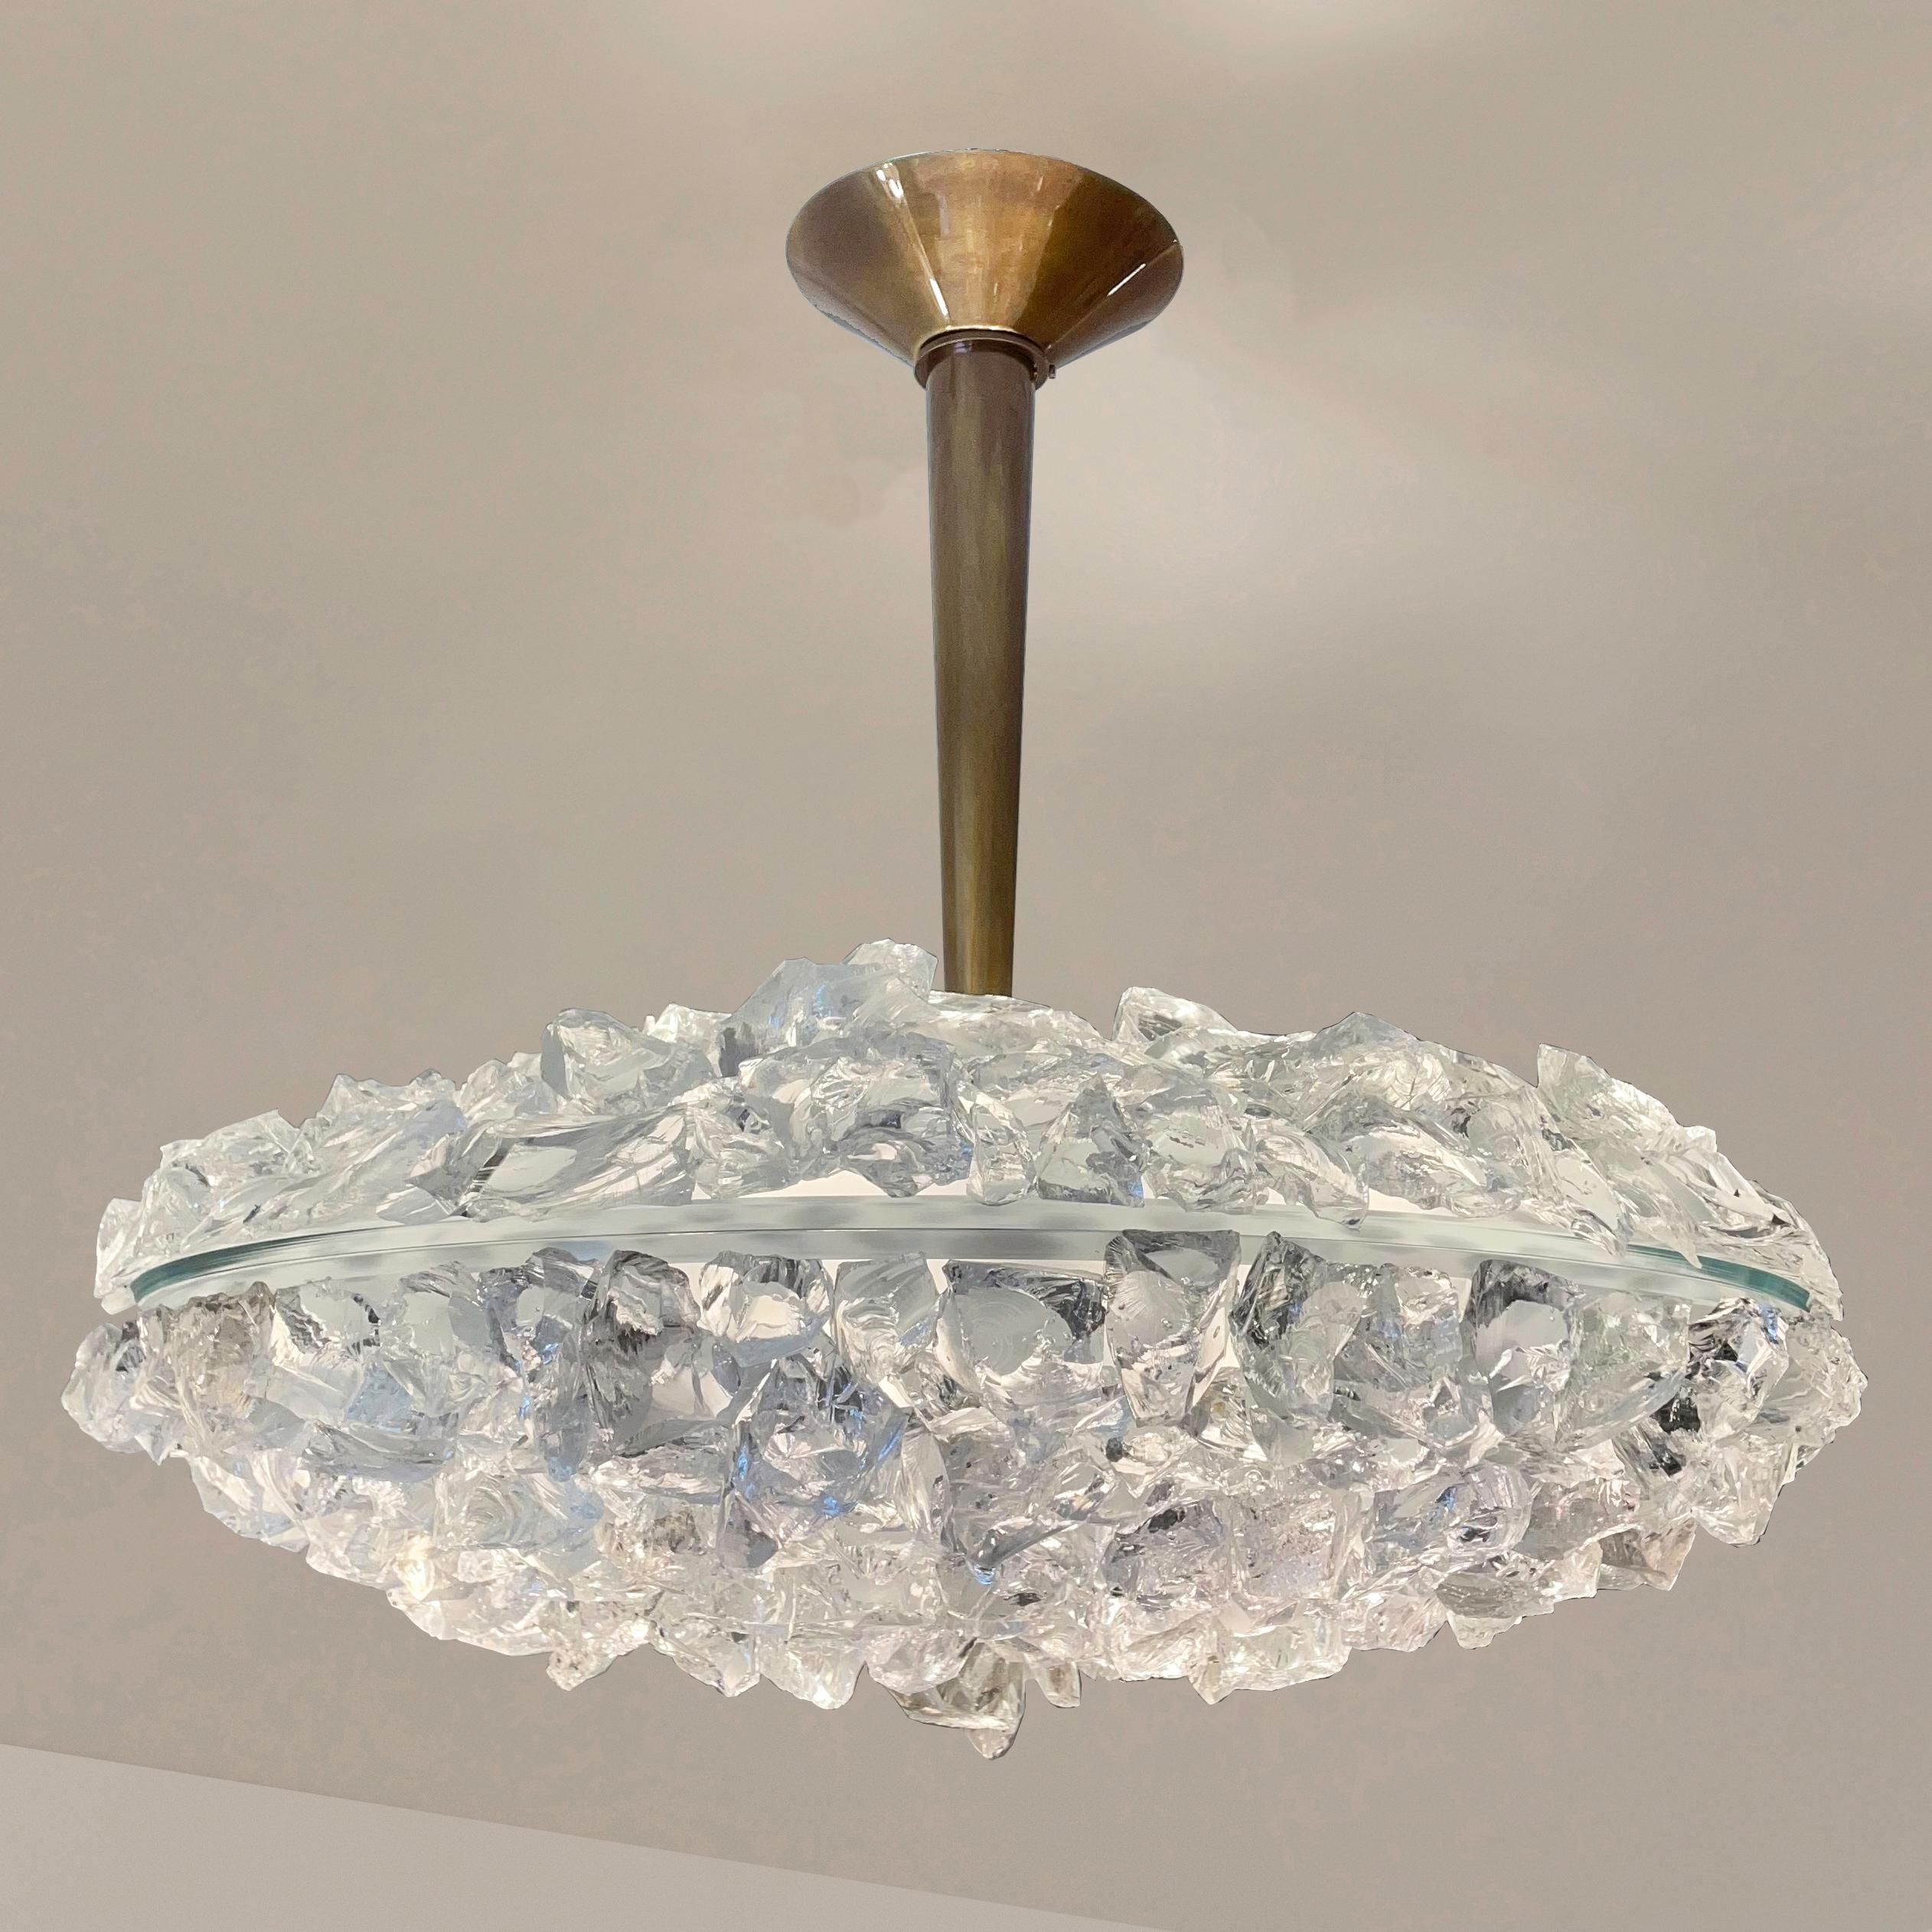 The focal point of the Matera Grande ceiling light is the sculptural glass shade composed of dozens of hand applied crystal elements. Its clean and modern stem and canopy, create a balanced contrast to the organic feel of the rest of the piece. Can